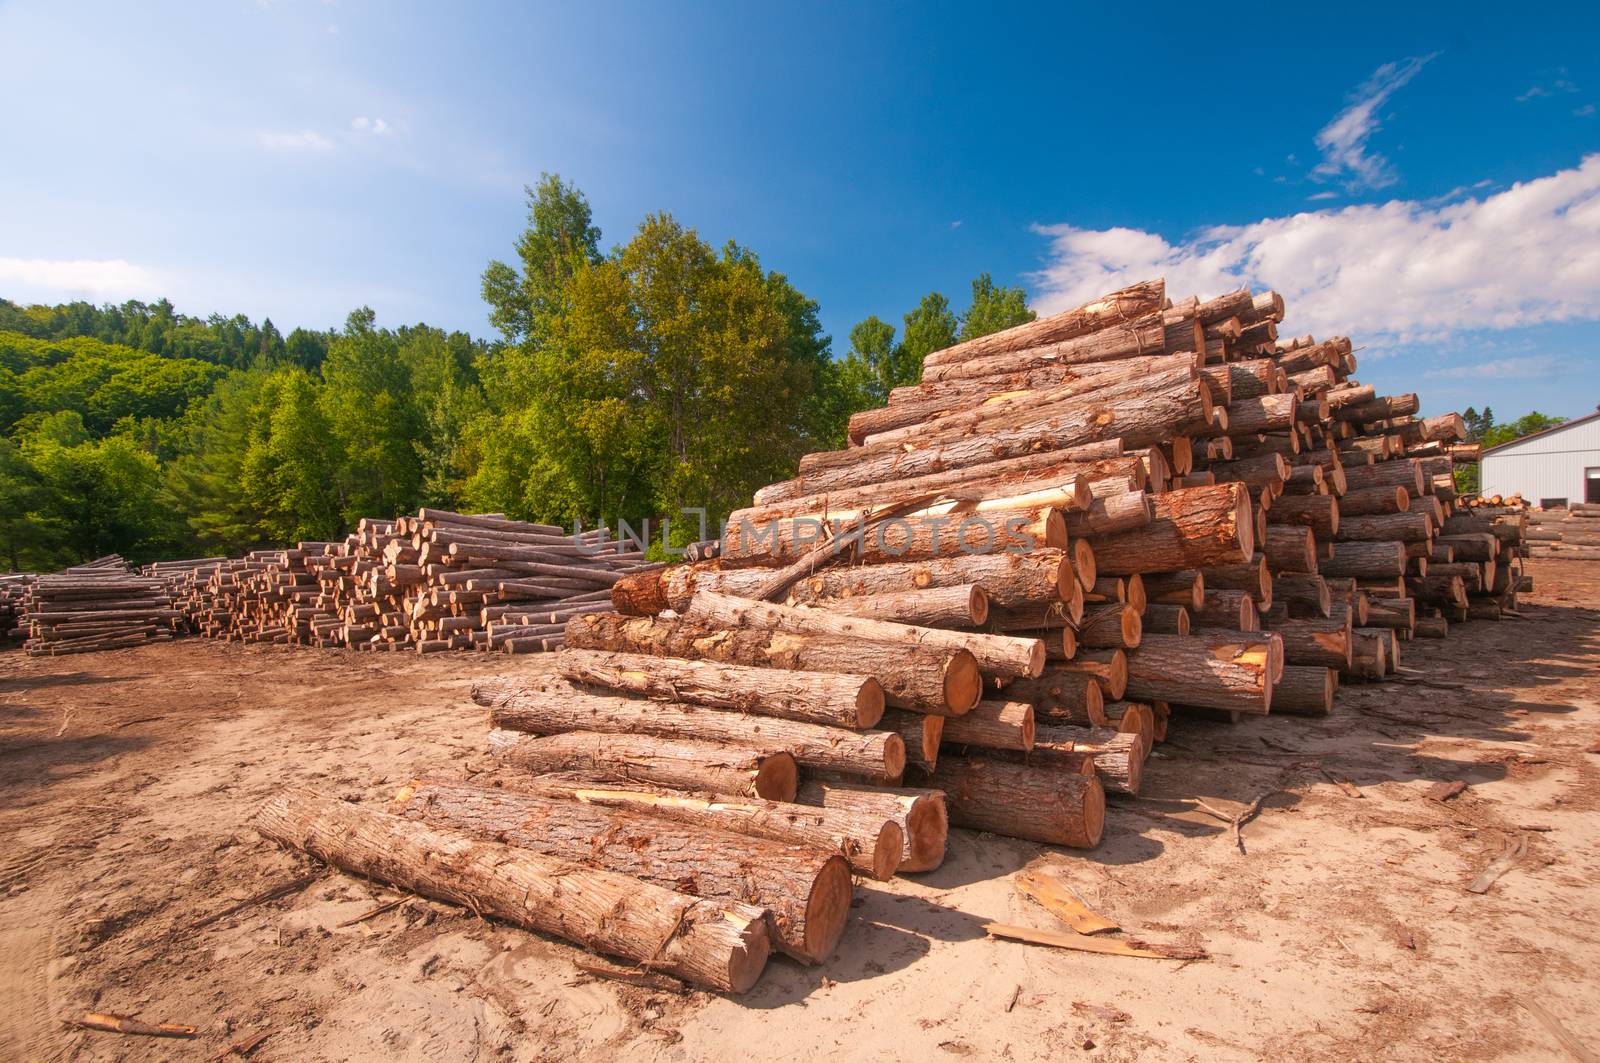 Pine logs stacked at lumber mill in Ontario, Canada